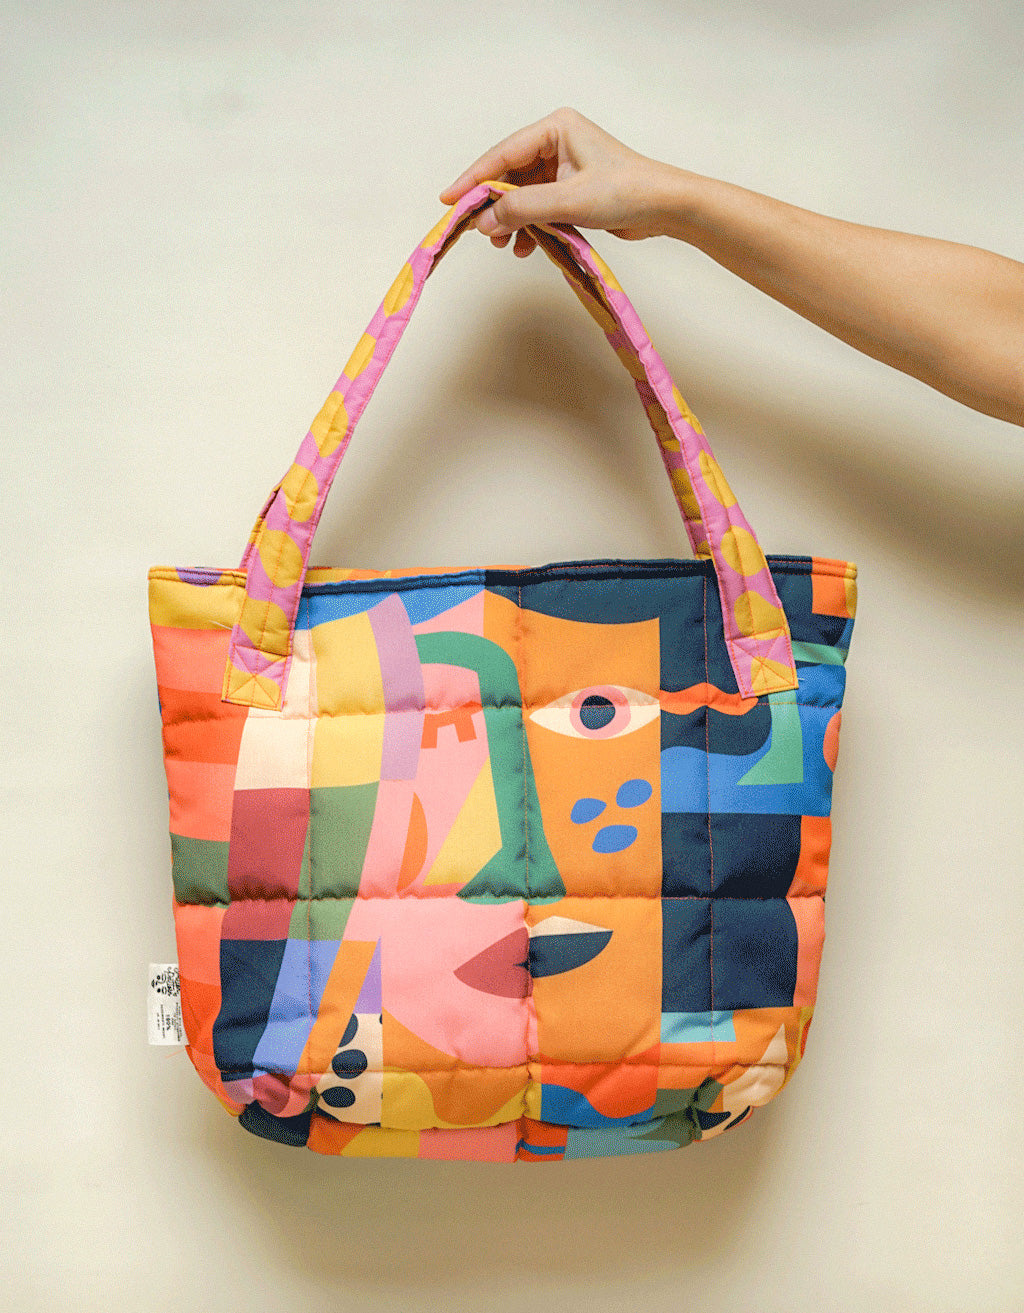 Marshmallow Bag - Picasso